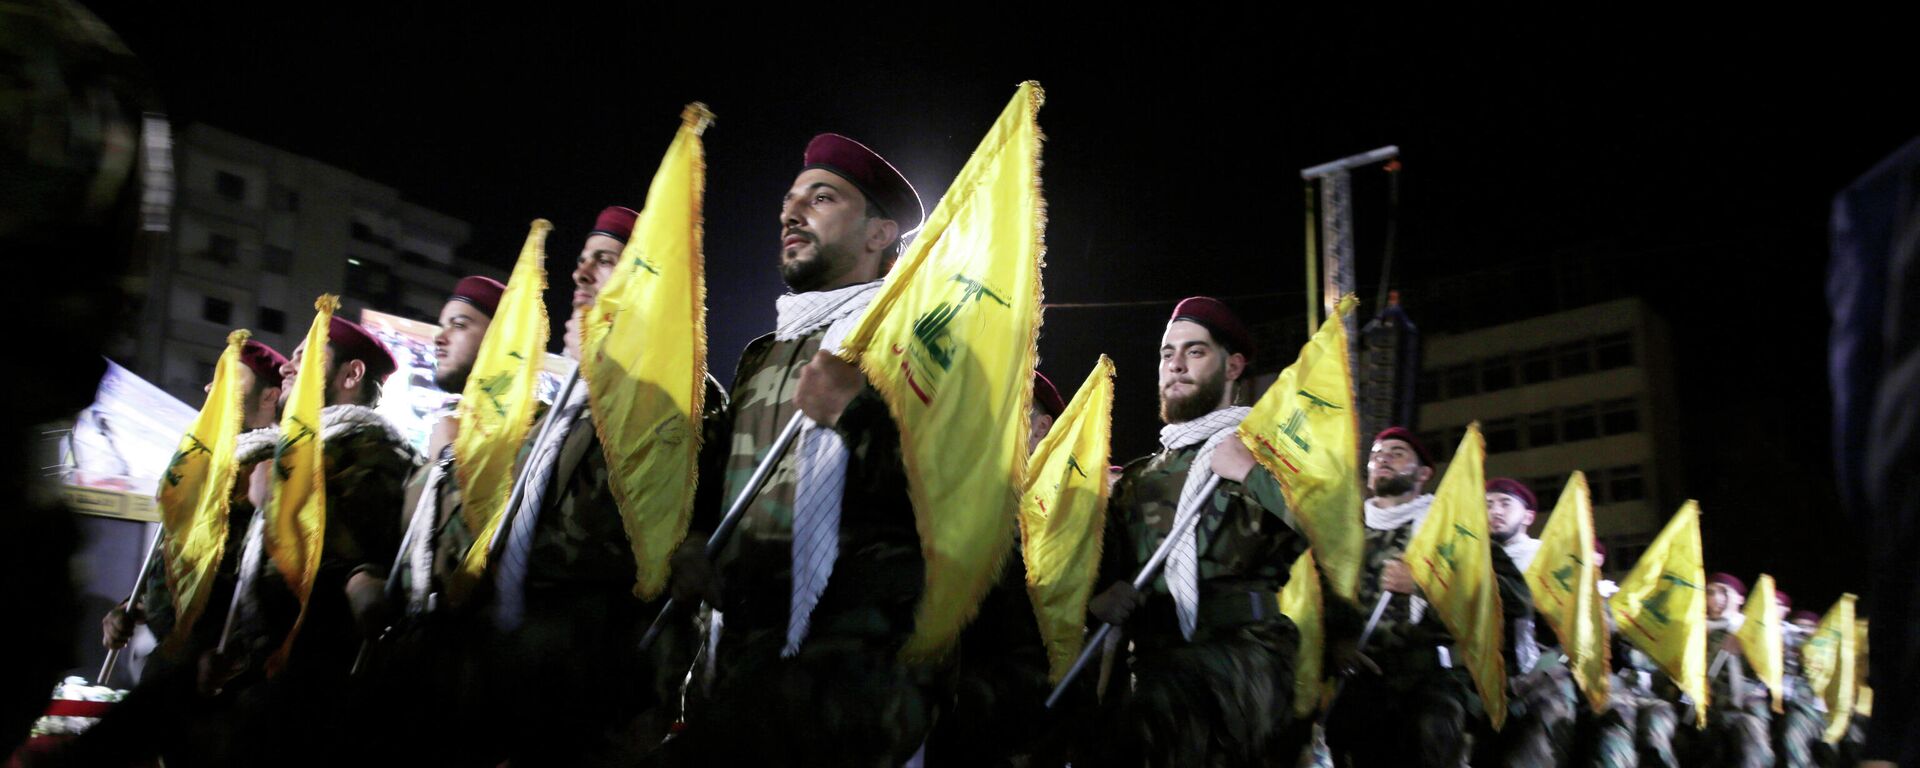  In this May 31, 2019 file photo, Hezbollah fighters march at a rally to mark Jerusalem day or Al-Quds day, in the southern Beirut suburb of Dahiyeh, Lebanon. On Monday, Oct. 18, 2021, Hezbollah leader Sheik Hassan Nasrallah revealed that his militant group has 100,000 trained fighters. - Sputnik International, 1920, 12.10.2023